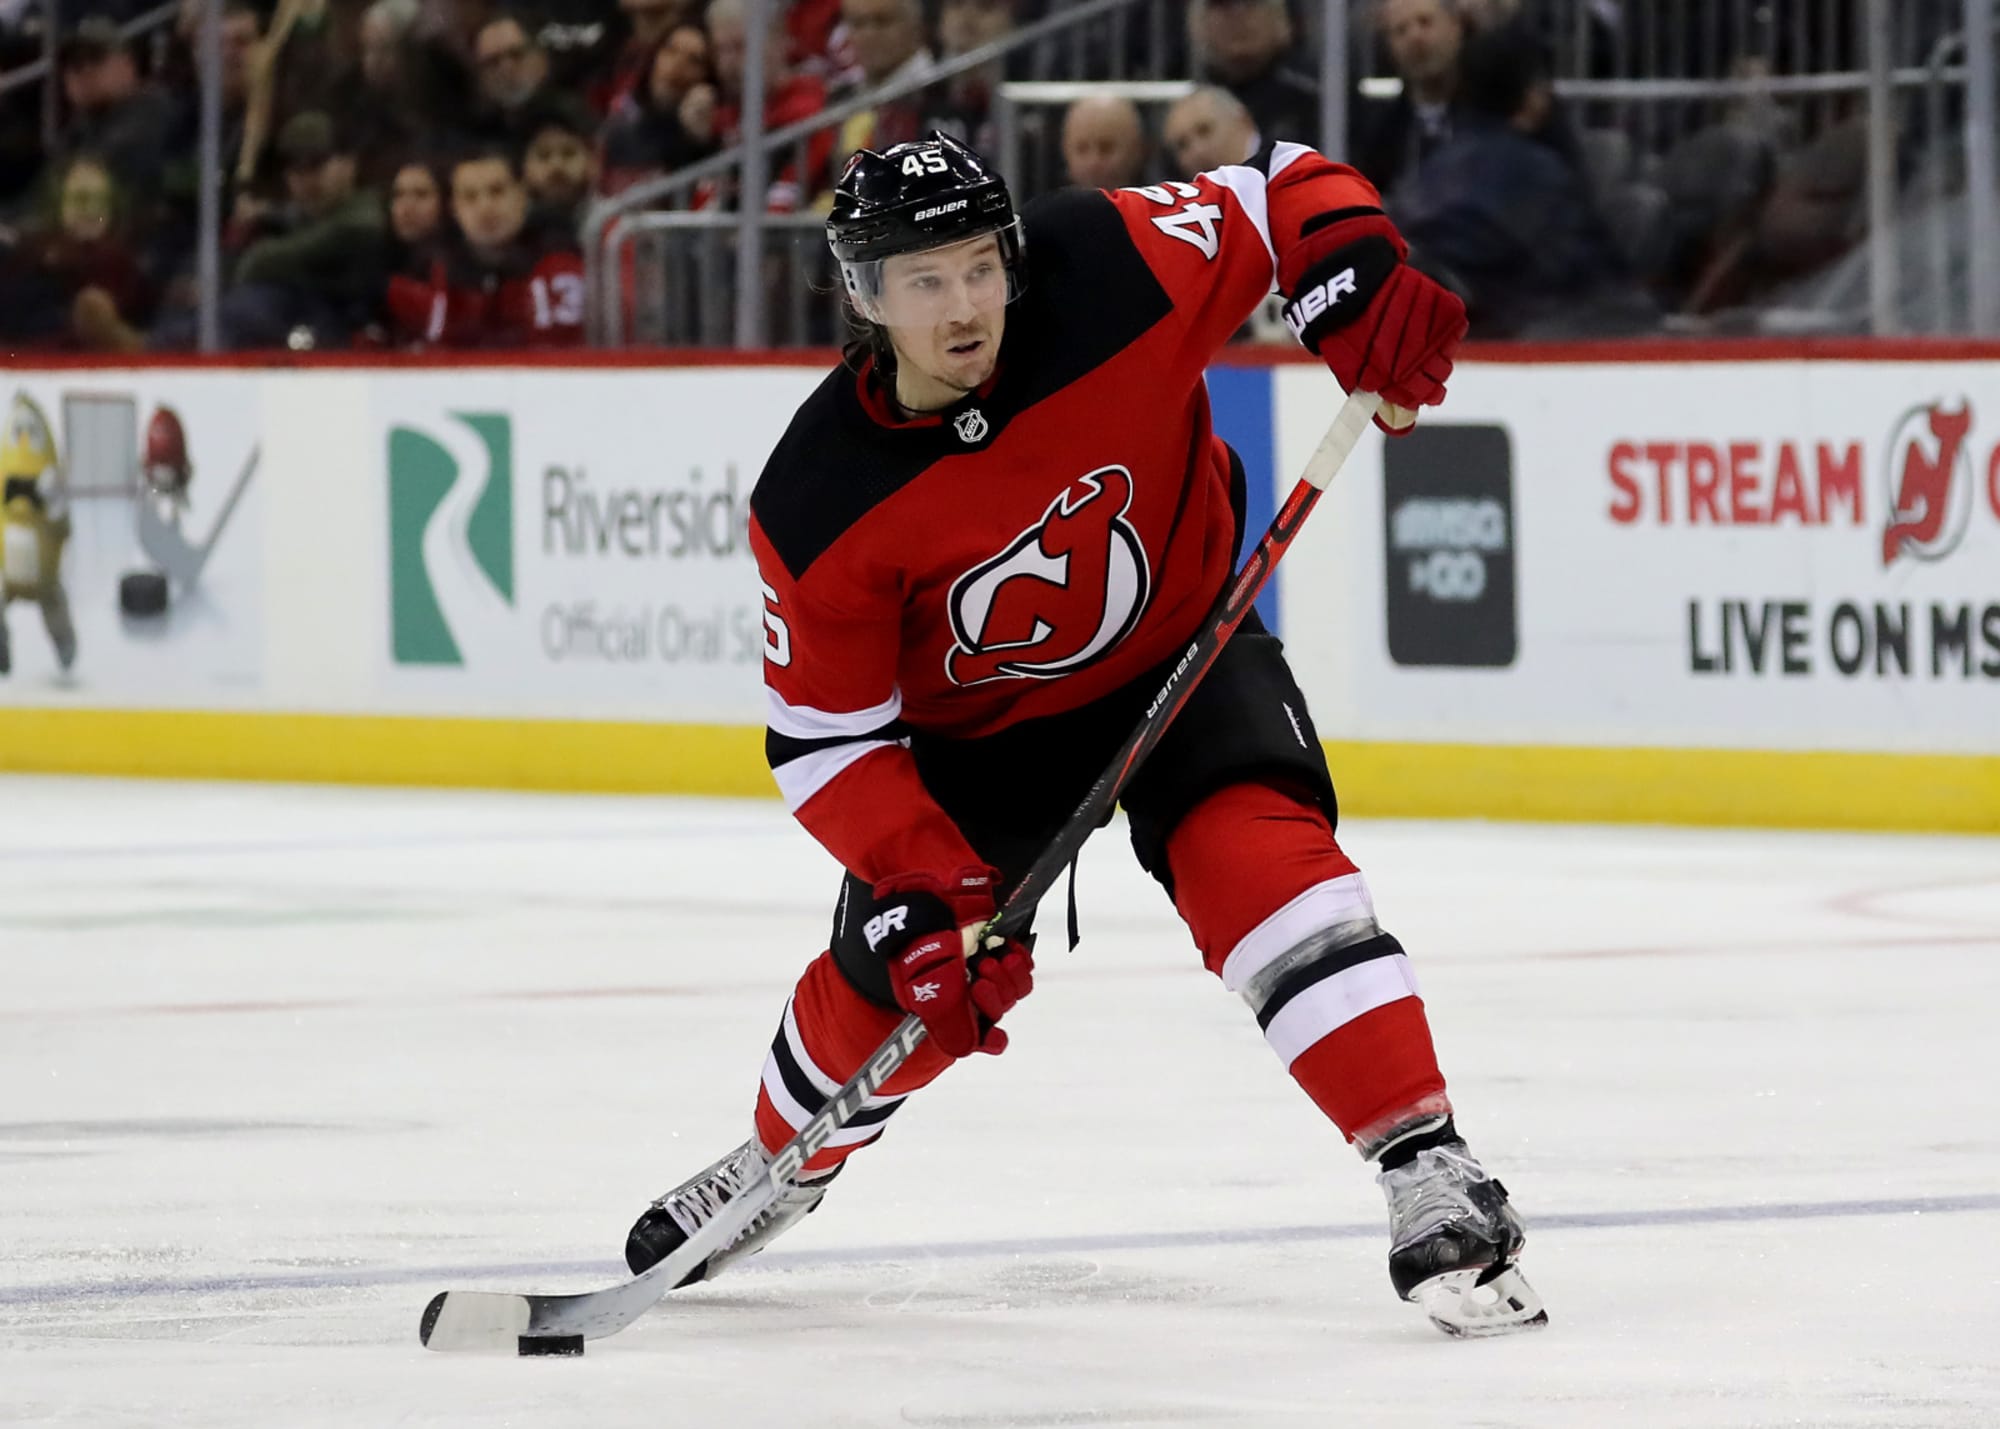 new jersey devils hockey game live